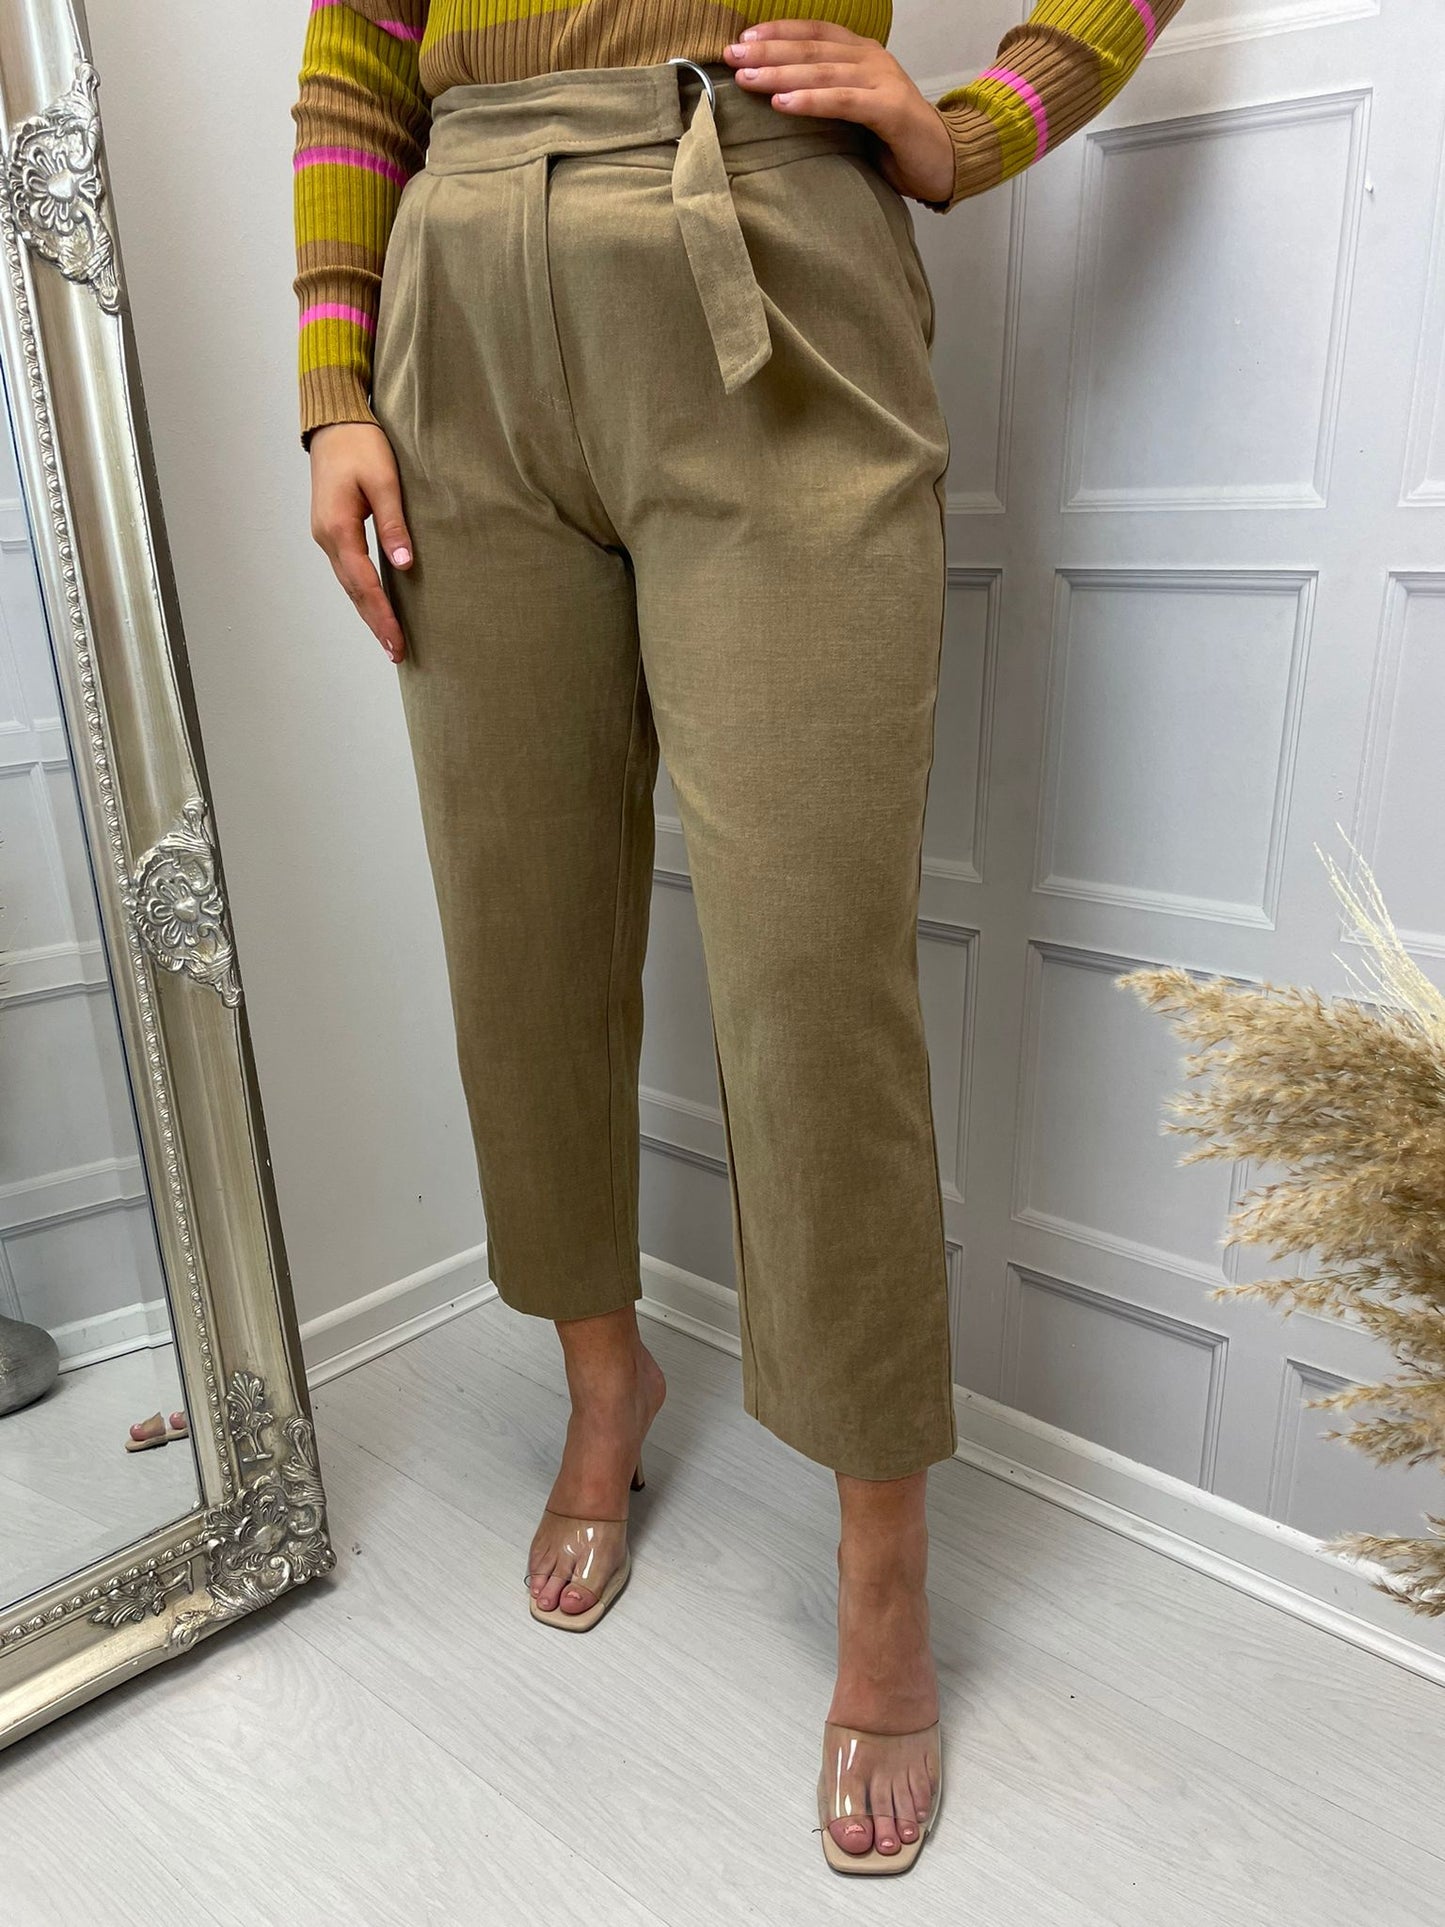 FRNCH Badiallo Trousers in Camel